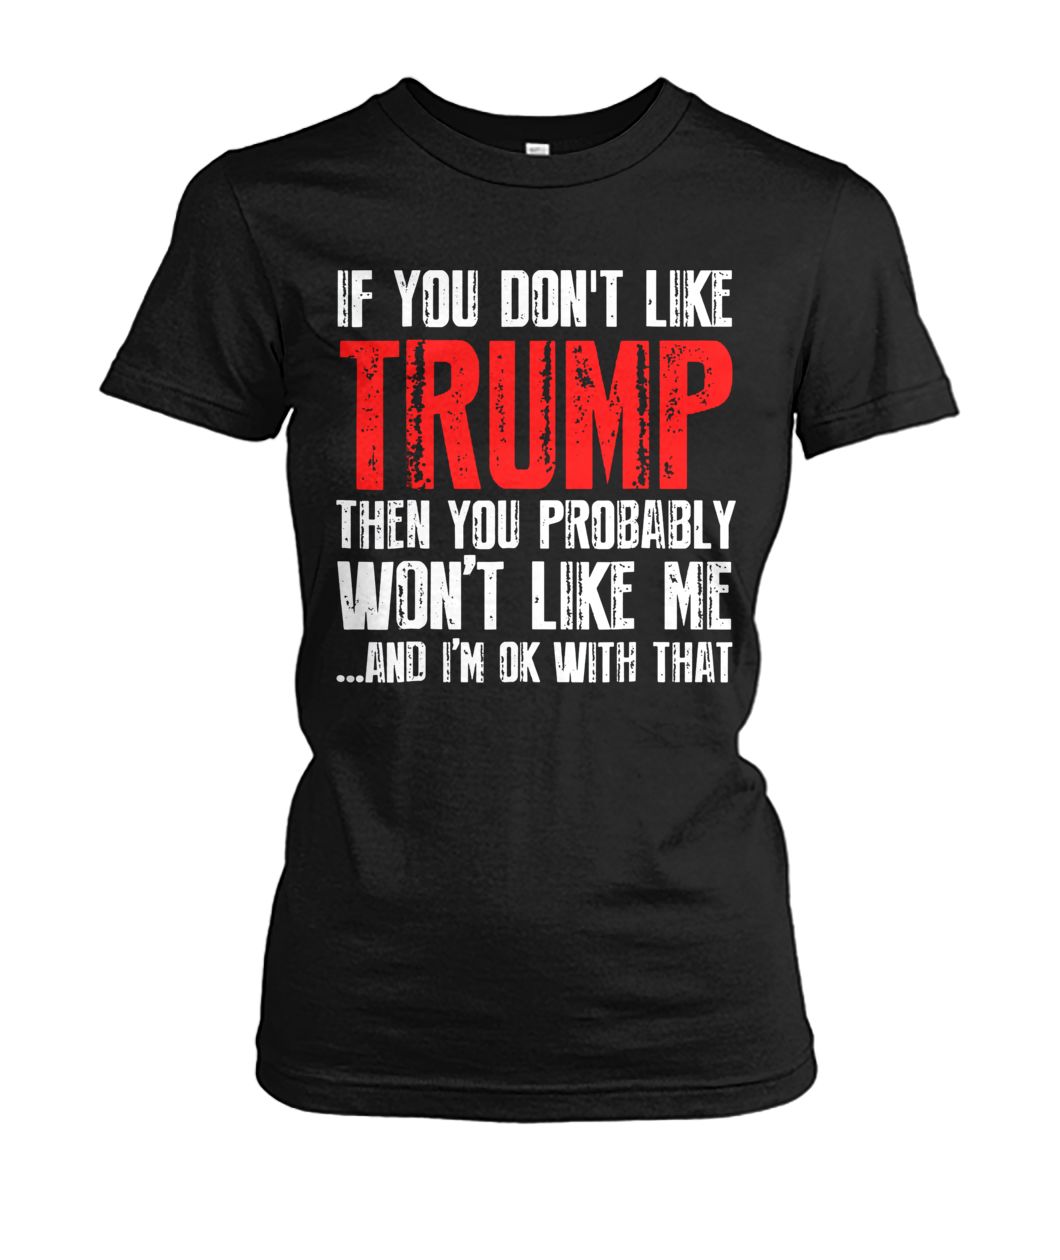 If you don’t like trump then you probably won’t like me and I’m ok with that women's crew tee